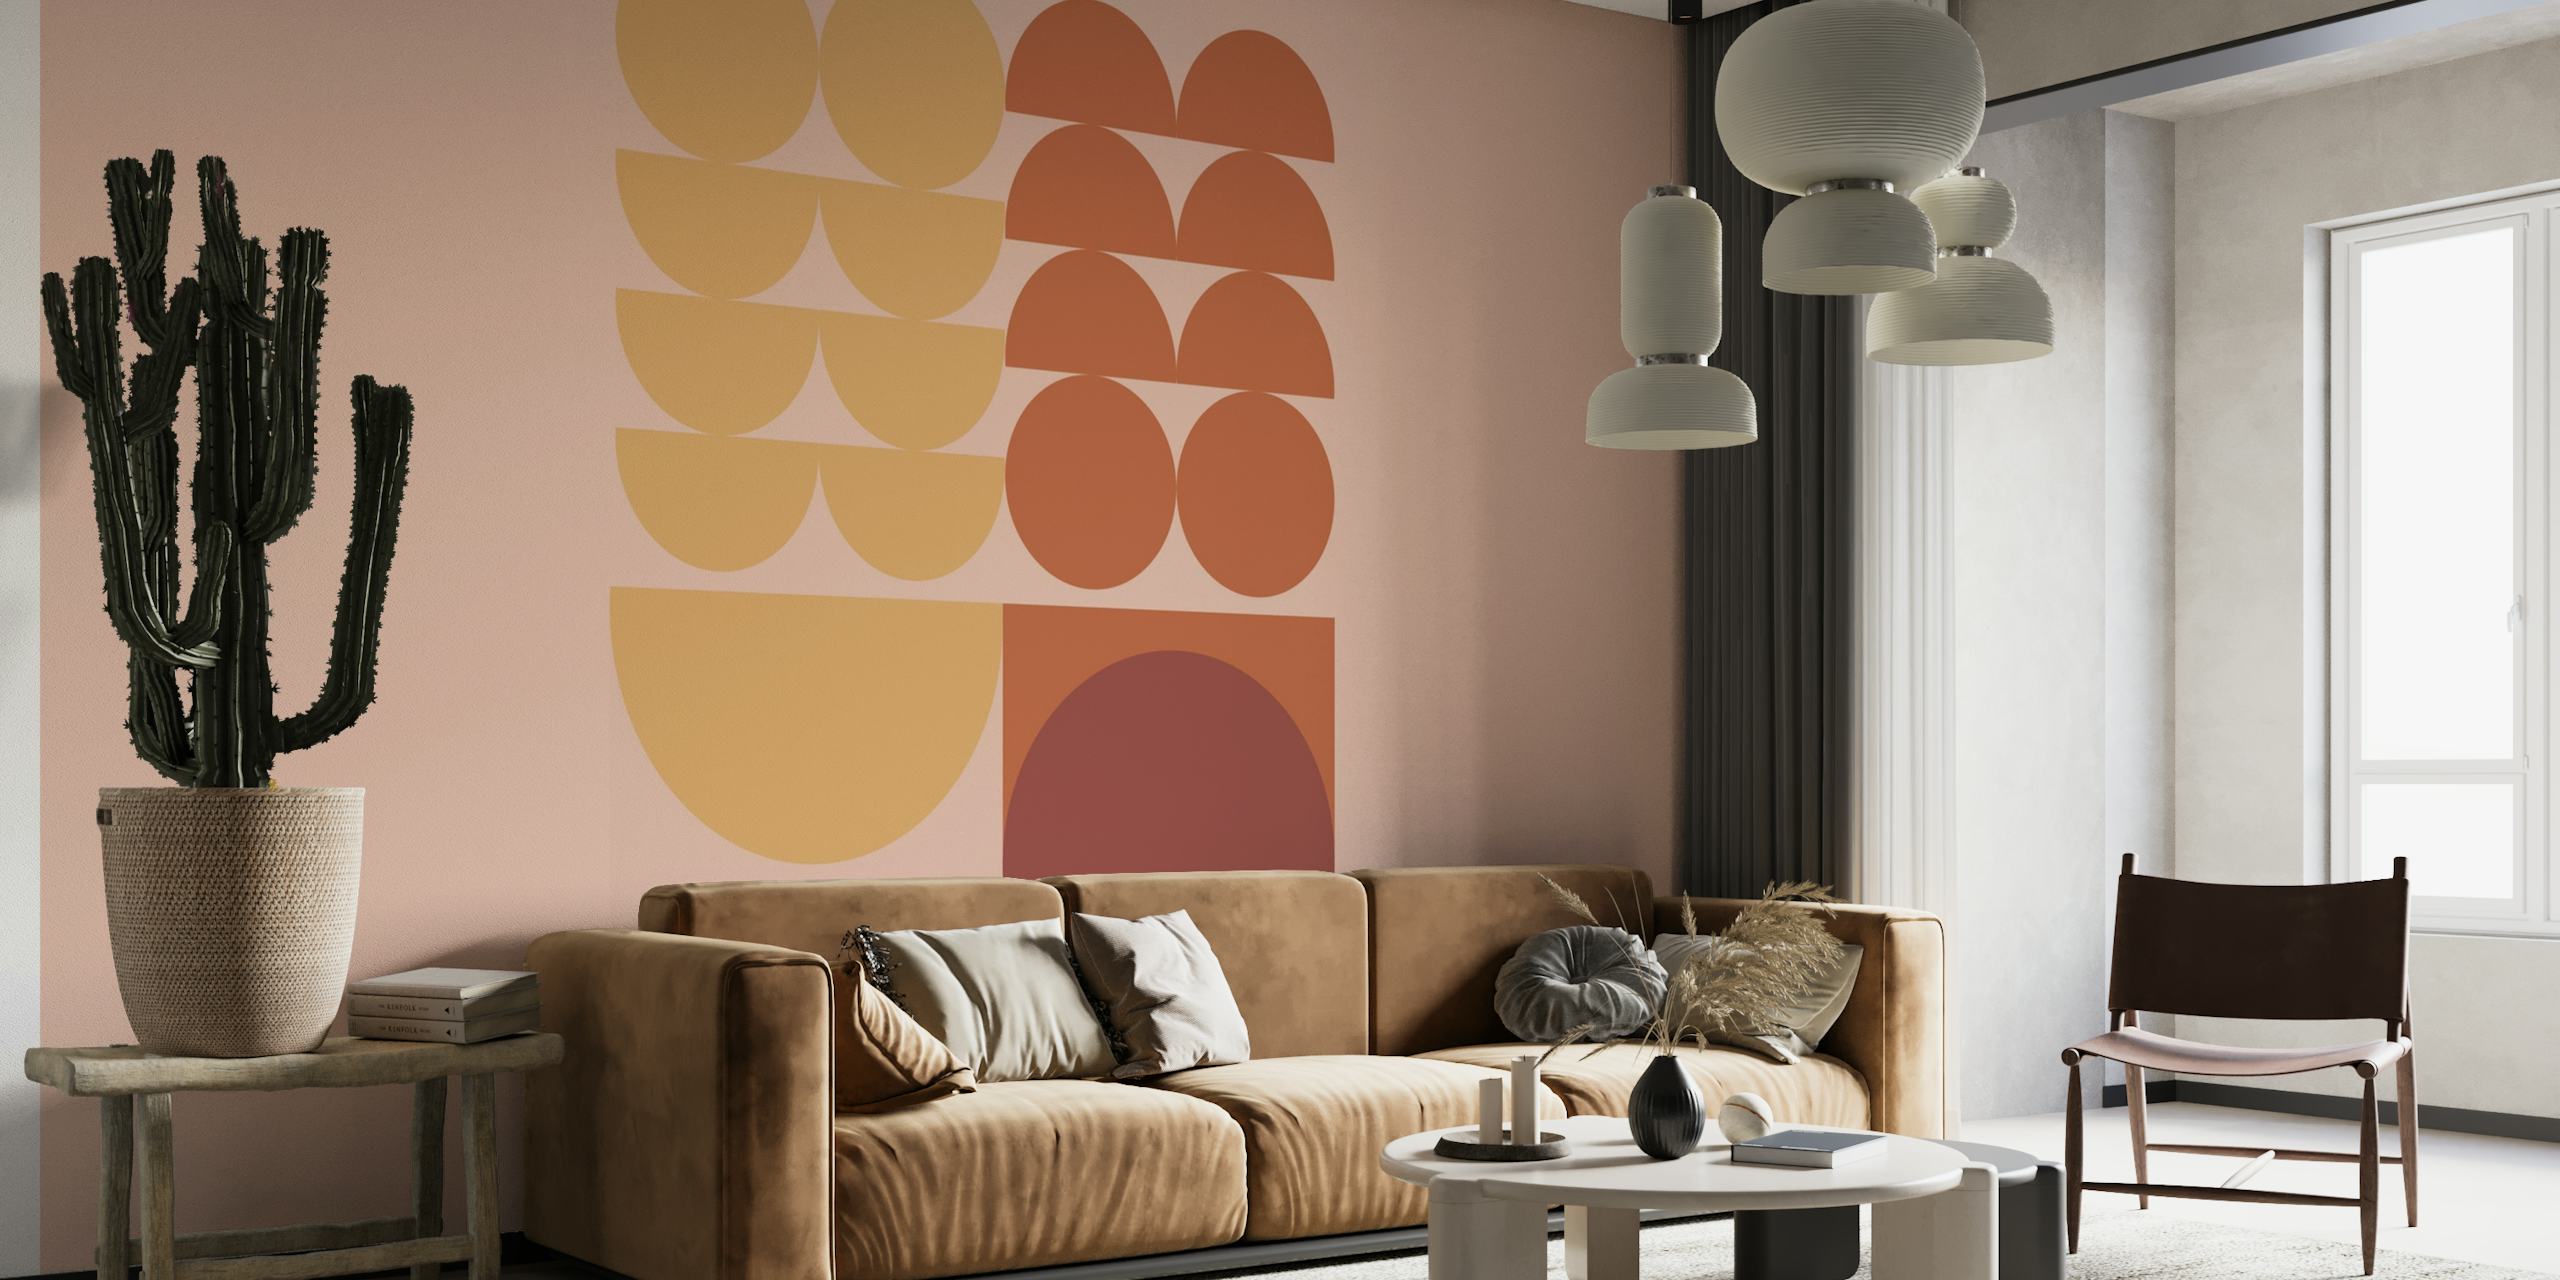 Contemporary 09 geometric wall mural with circles and rectangles in terracotta, ochre, and maroon on a blush background